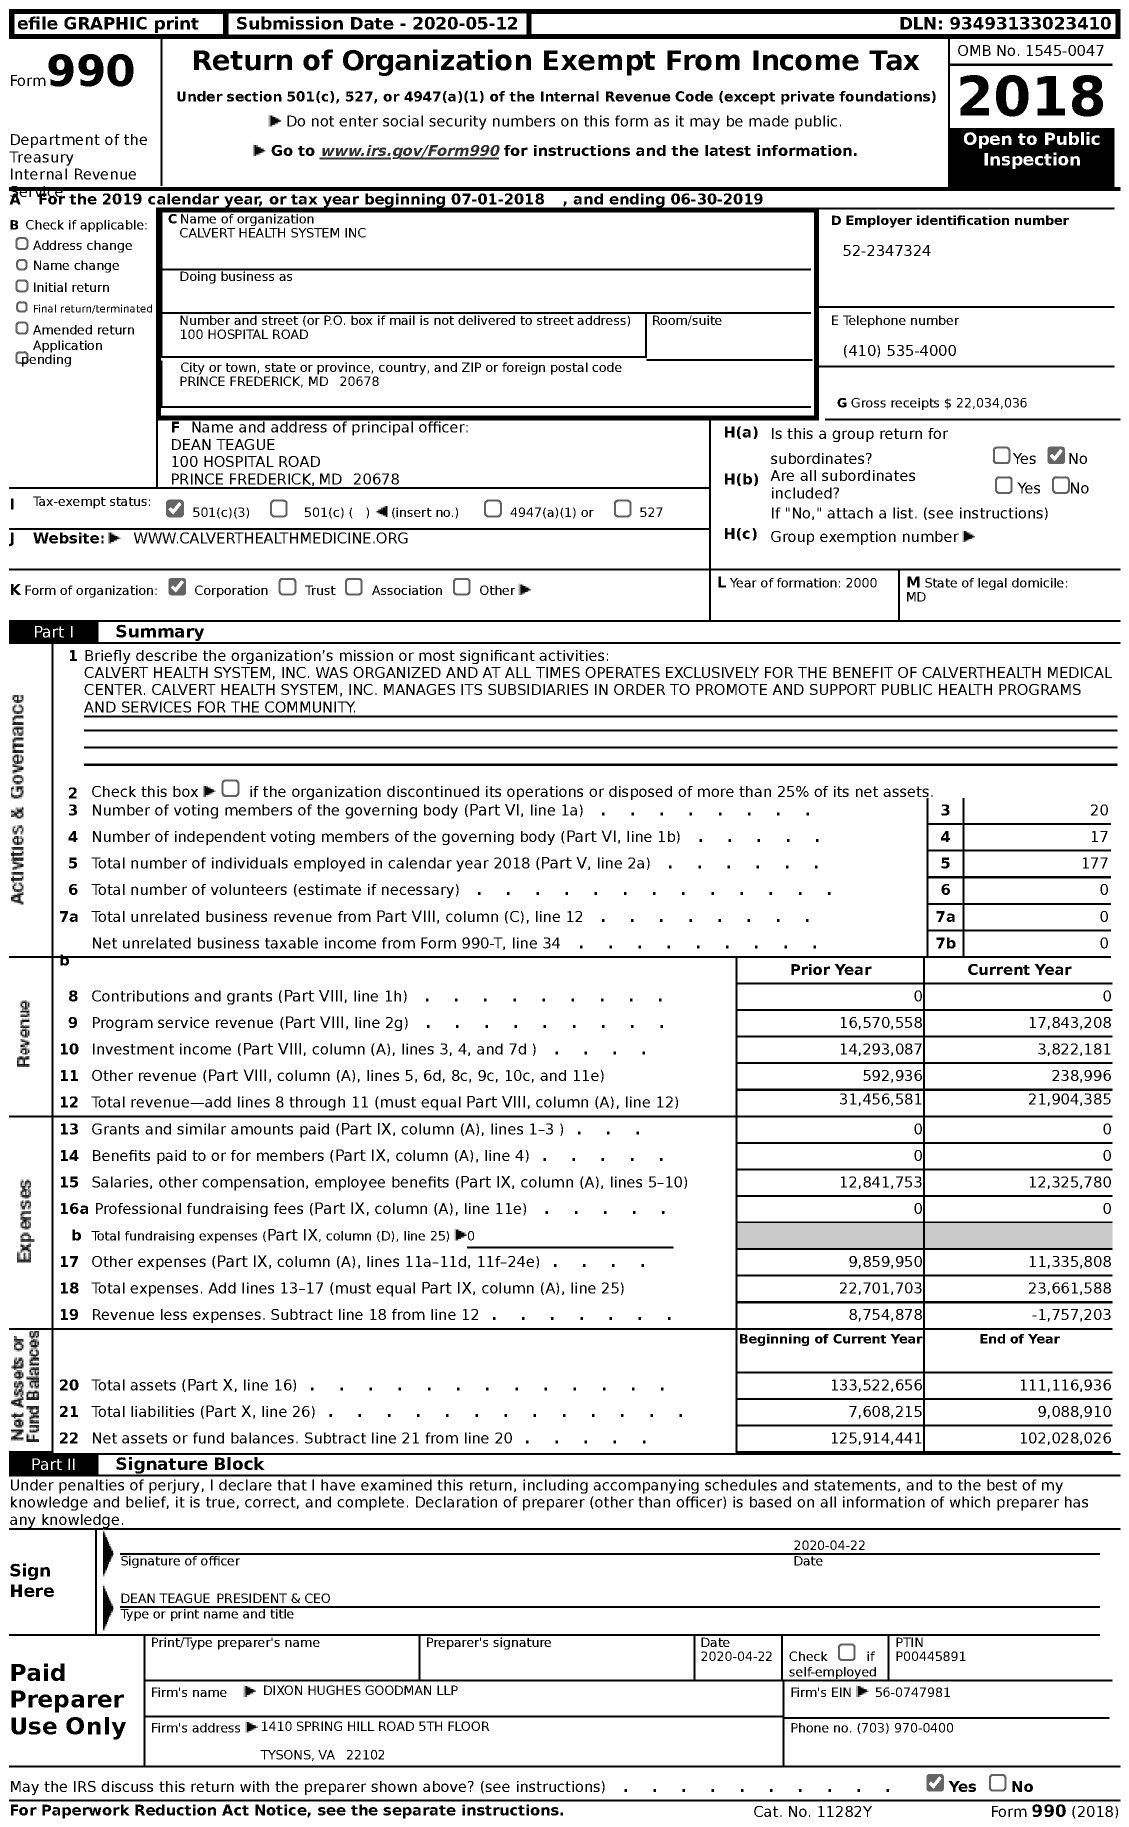 Image of first page of 2018 Form 990 for Calvert Health System (CHS)